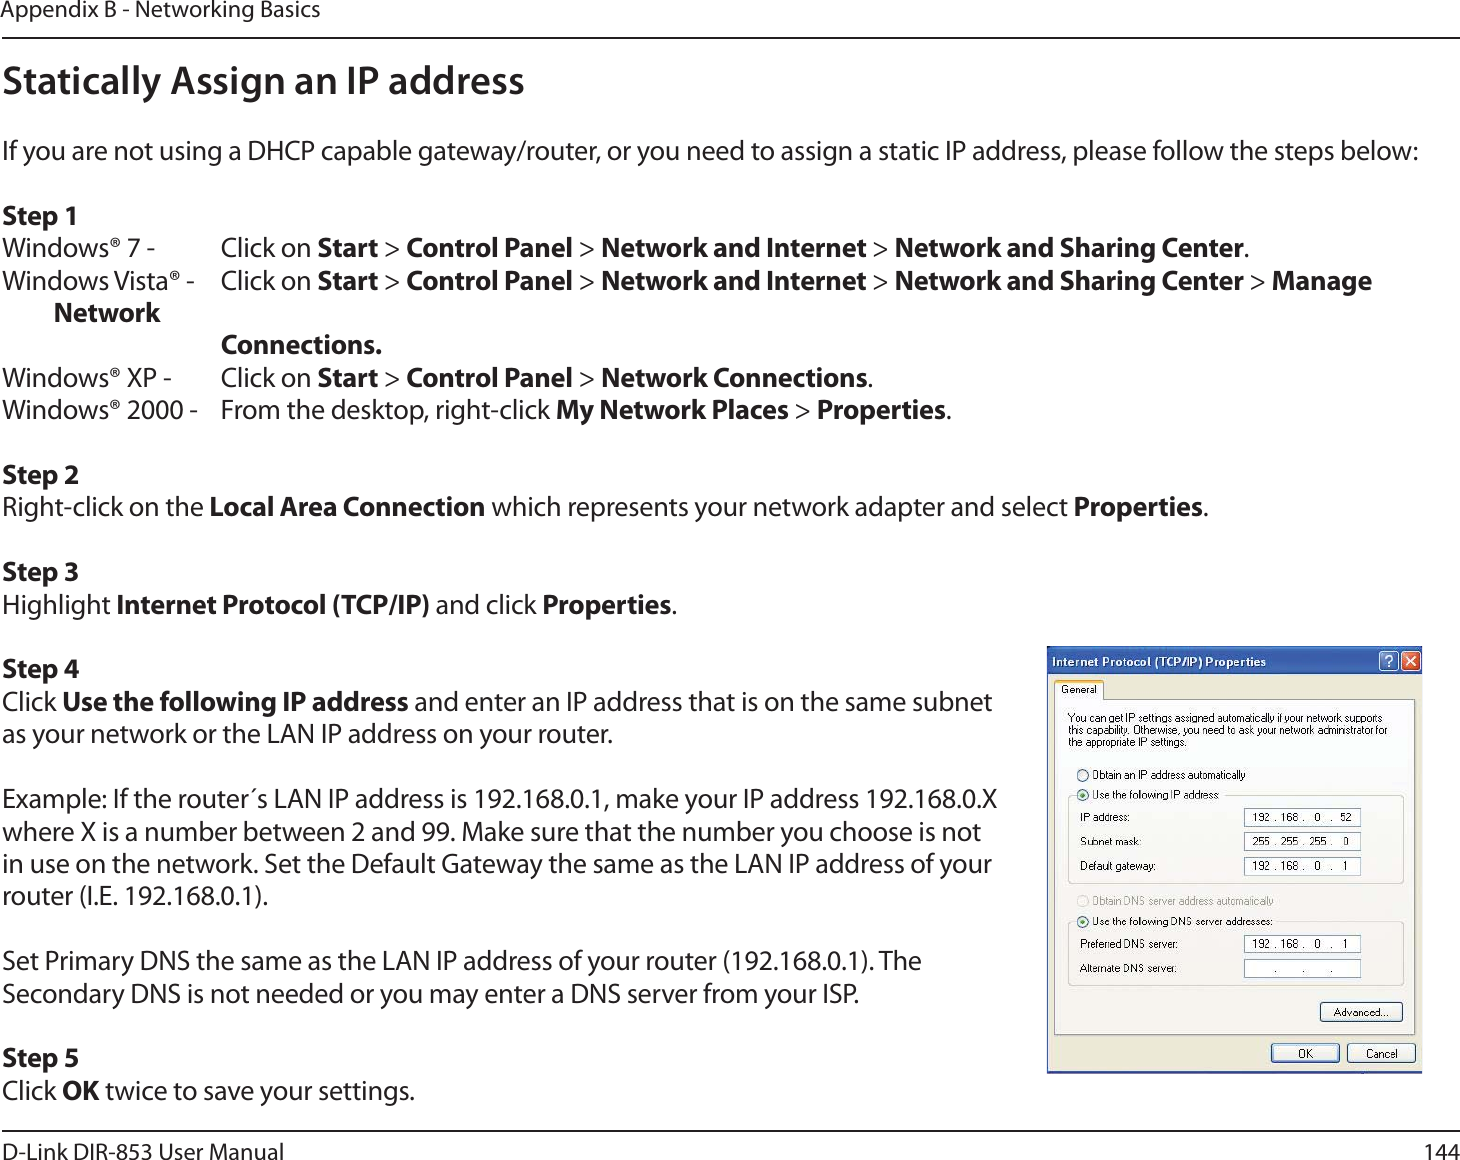 144D-Link DIR-853 User ManualAppendix B - Networking BasicsStatically Assign an IP addressIf you are not using a DHCP capable gateway/router, or you need to assign a static IP address, please follow the steps below:Step 1Windows® 7 -  Click on Start &gt; Control Panel &gt; Network and Internet &gt; Network and Sharing Center.Windows Vista® -  Click on Start &gt; Control Panel &gt; Network and Internet &gt; Network and Sharing Center &gt; Manage Network    Connections.Windows® XP -  Click on Start &gt; Control Panel &gt; Network Connections.Windows® 2000 -  From the desktop, right-click My Network Places &gt; Properties.Step 2Right-click on the Local Area Connection which represents your network adapter and select Properties.Step 3Highlight Internet Protocol (TCP/IP) and click Properties.Step 4Click Use the following IP address and enter an IP address that is on the same subnet as your network or the LAN IP address on your router. Example: If the router´s LAN IP address is 192.168.0.1, make your IP address 192.168.0.X where X is a number between 2 and 99. Make sure that the number you choose is not in use on the network. Set the Default Gateway the same as the LAN IP address of your router (I.E. 192.168.0.1). Set Primary DNS the same as the LAN IP address of your router (192.168.0.1). The Secondary DNS is not needed or you may enter a DNS server from your ISP.Step 5Click OK twice to save your settings.